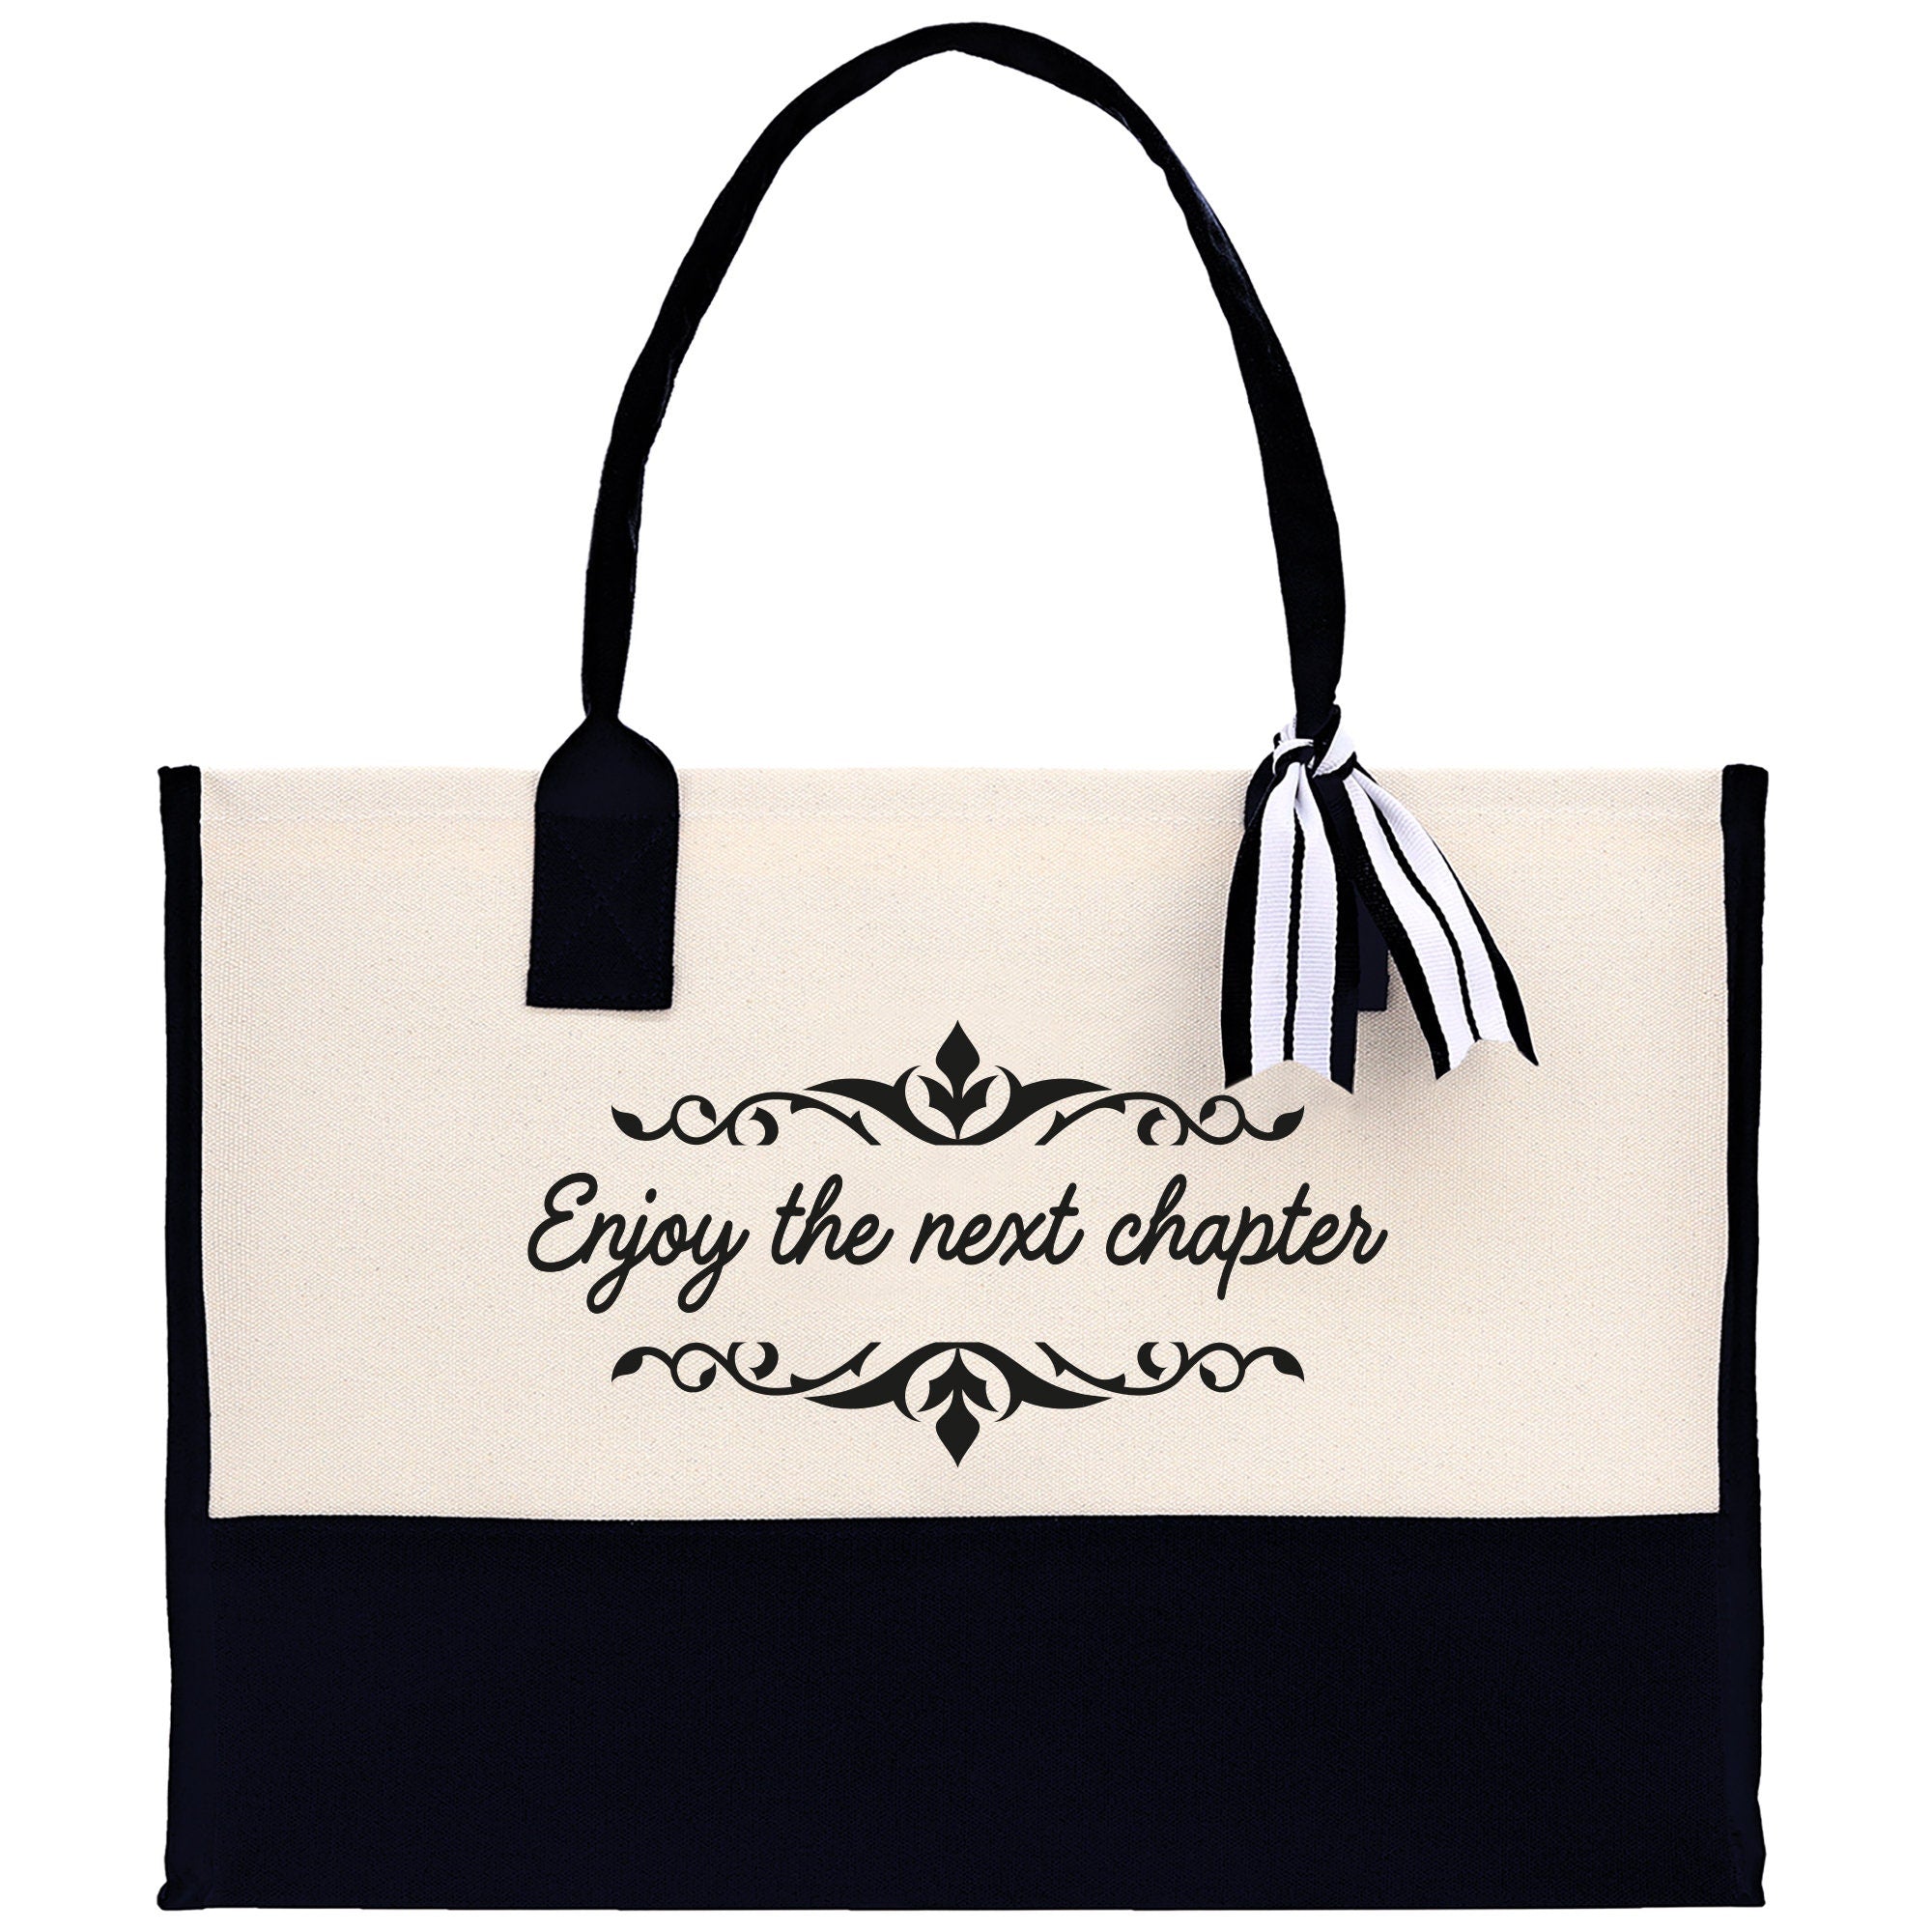 Enjoy The Next Chapter Canvas Tote Bag Birthday Gift for Her Weekender Tote Bag Beach Tote Bag Large Beach Tote Bag